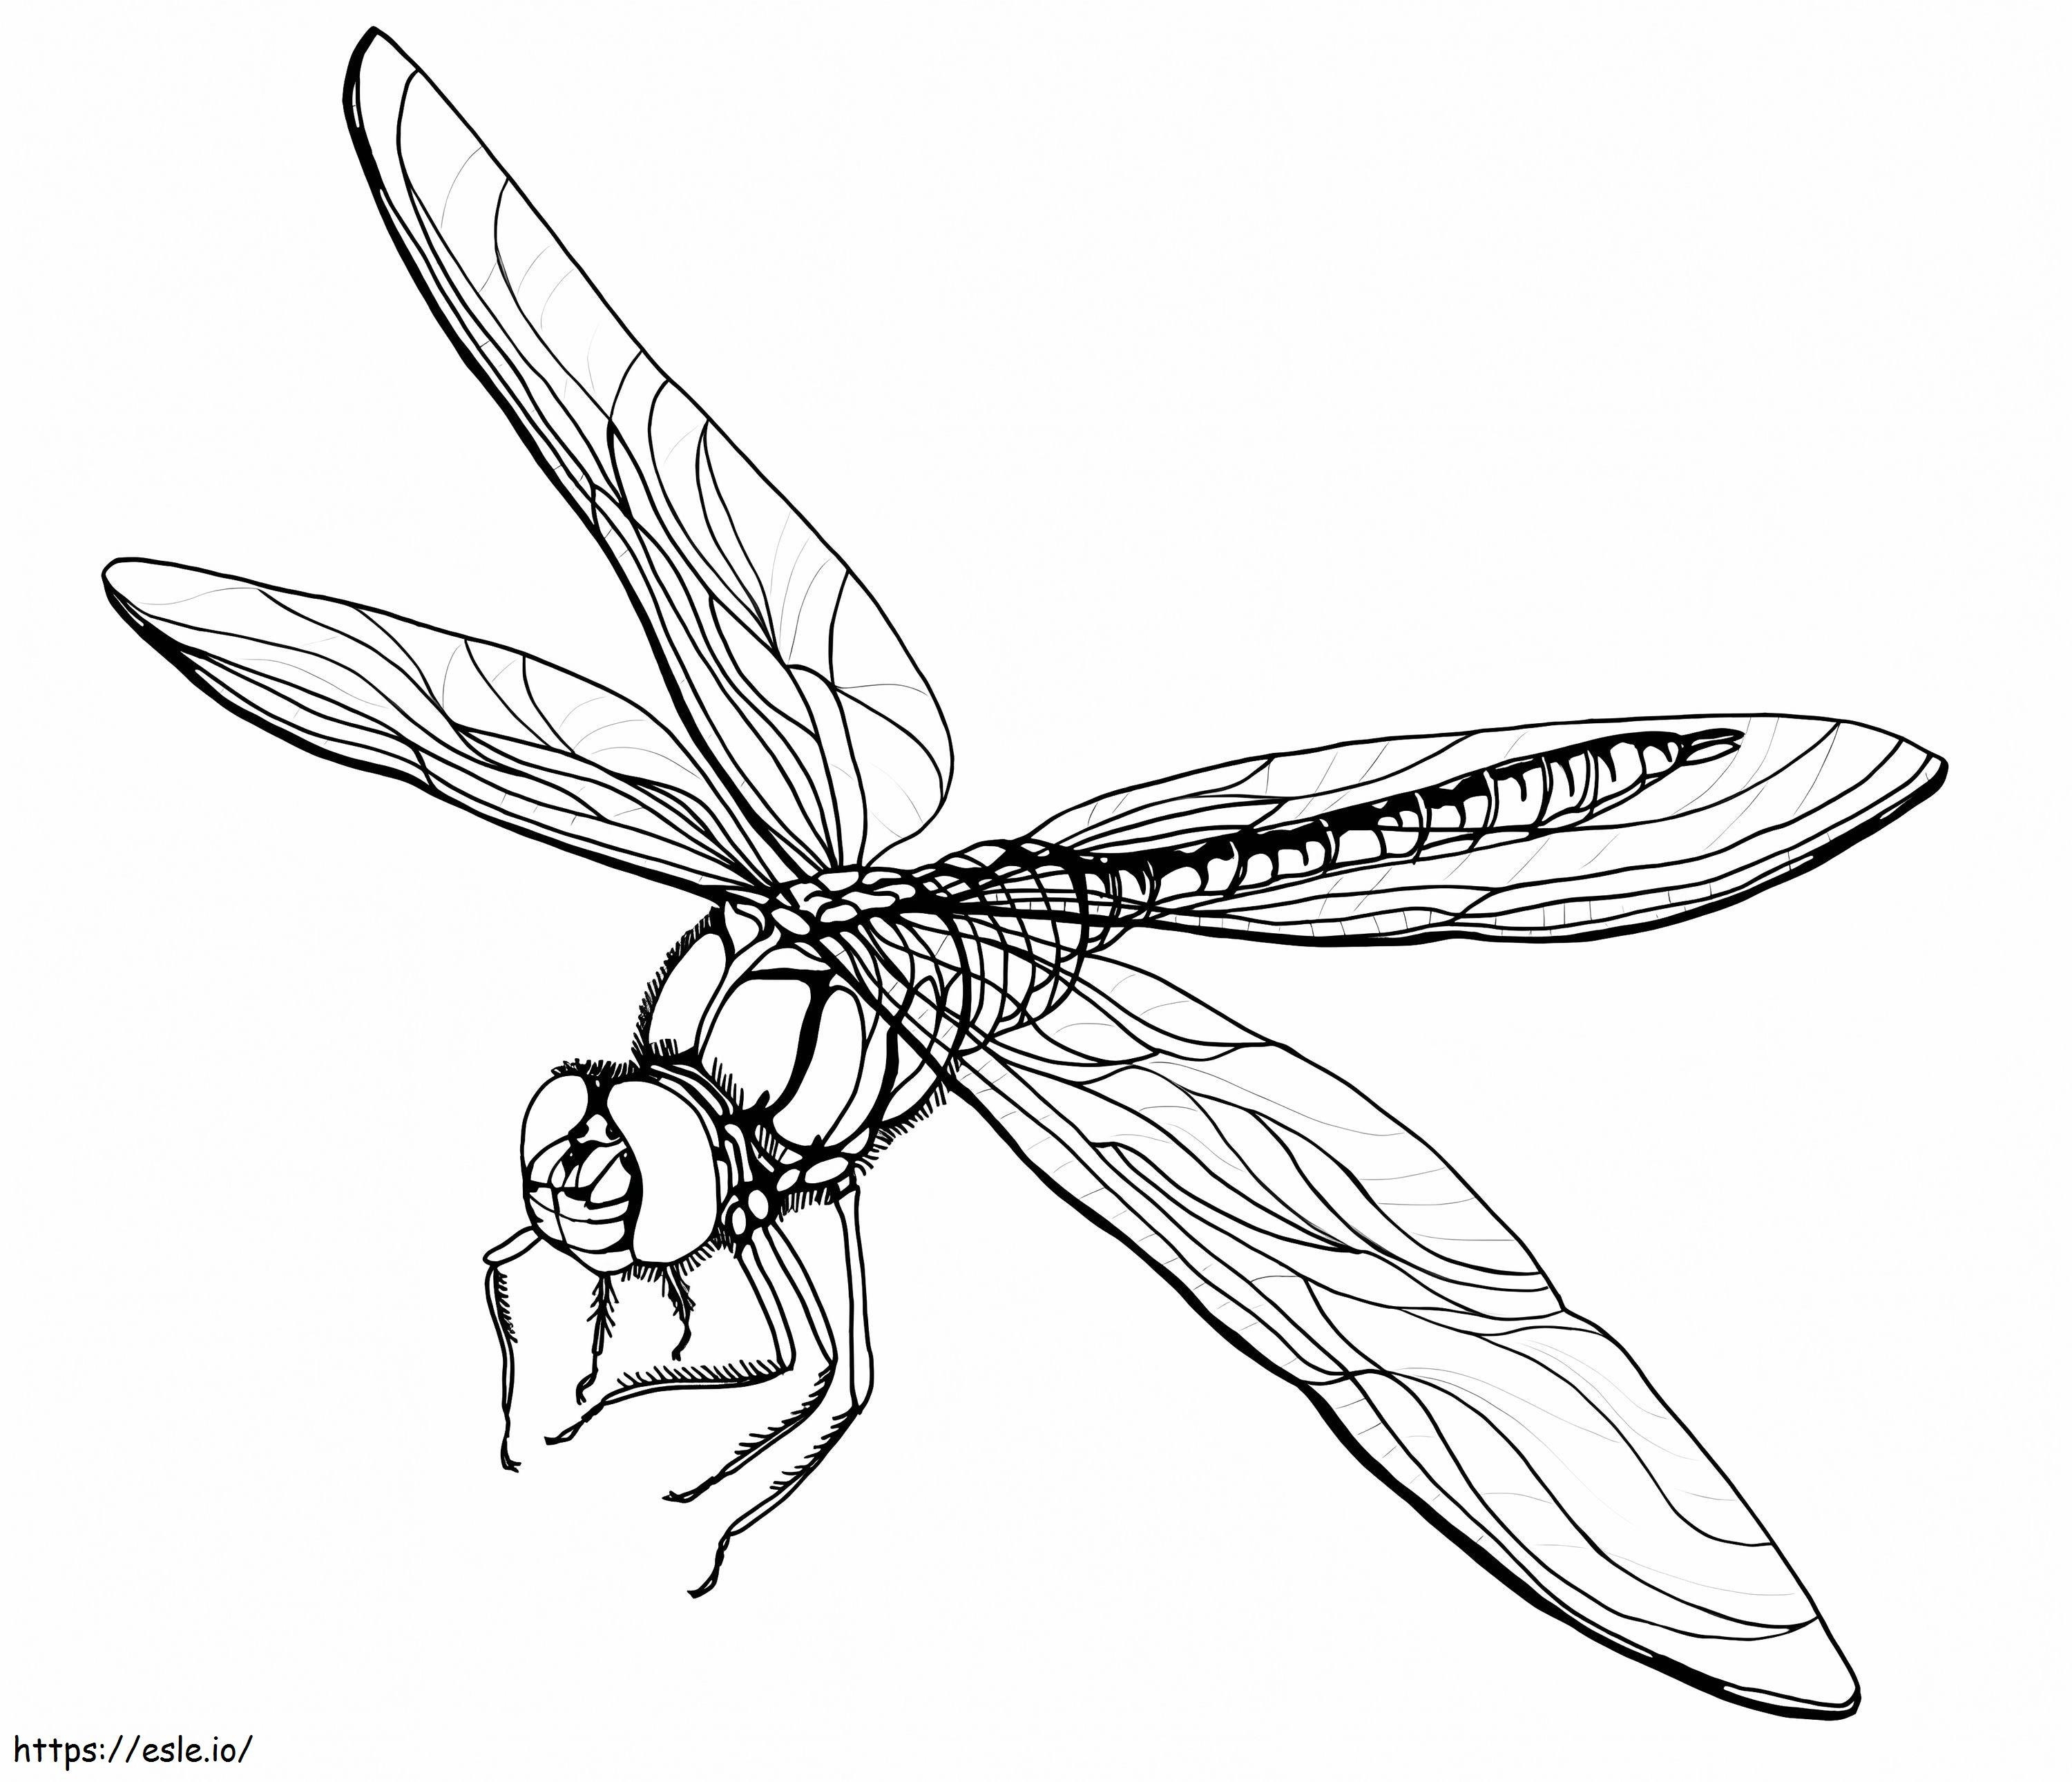 Normal Dragonfly coloring page